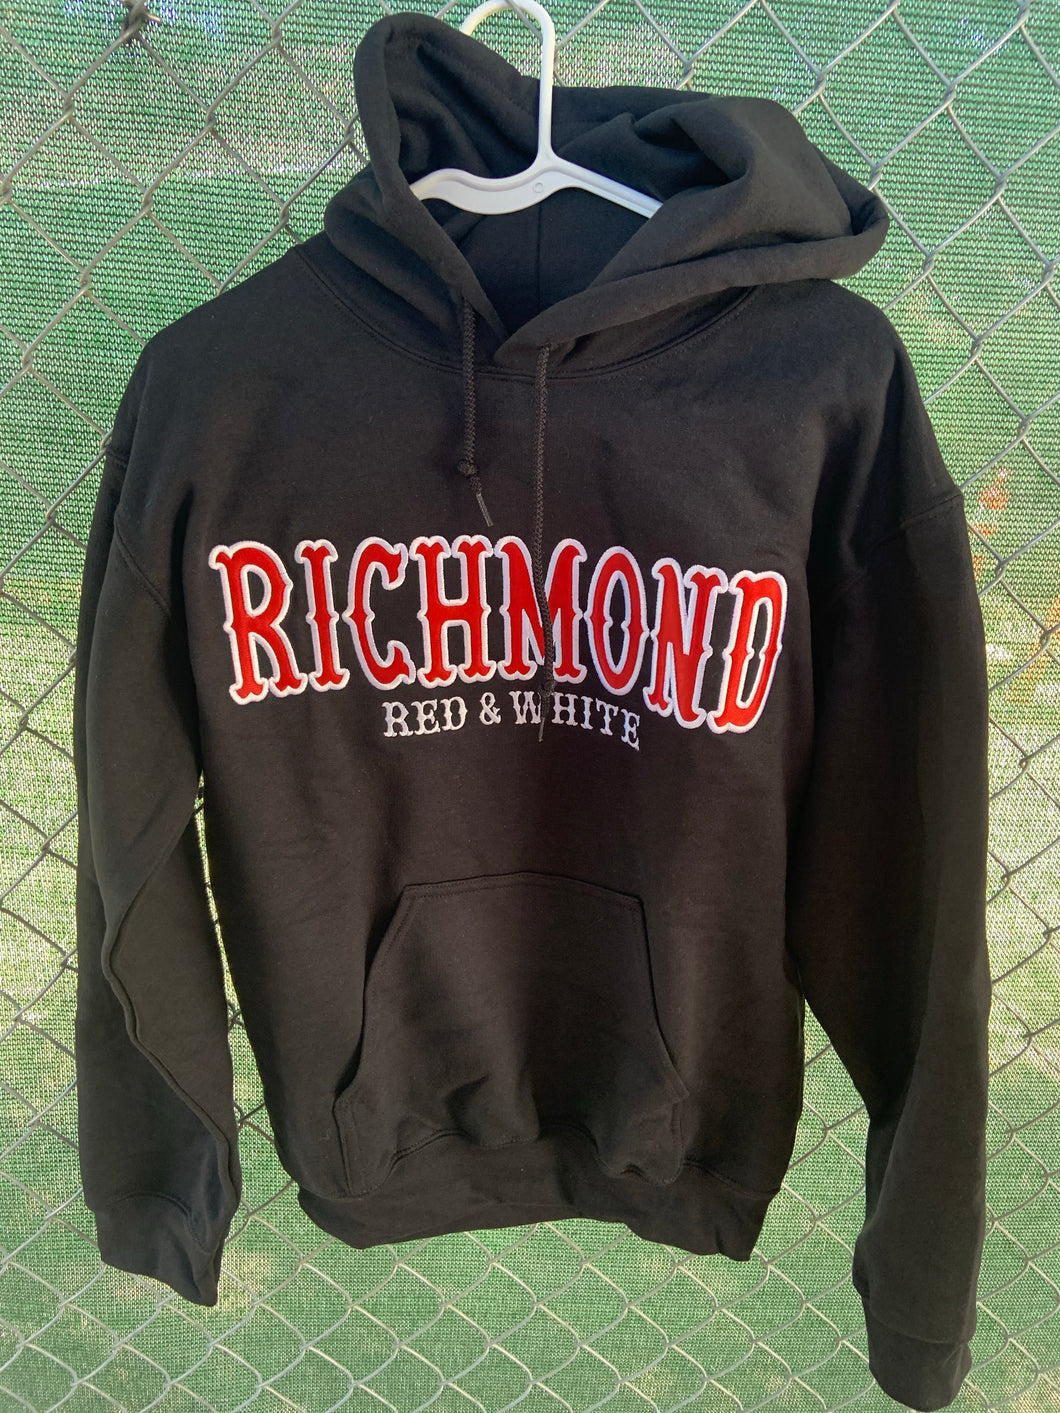 Black hoodie with richmond red and white embroidered